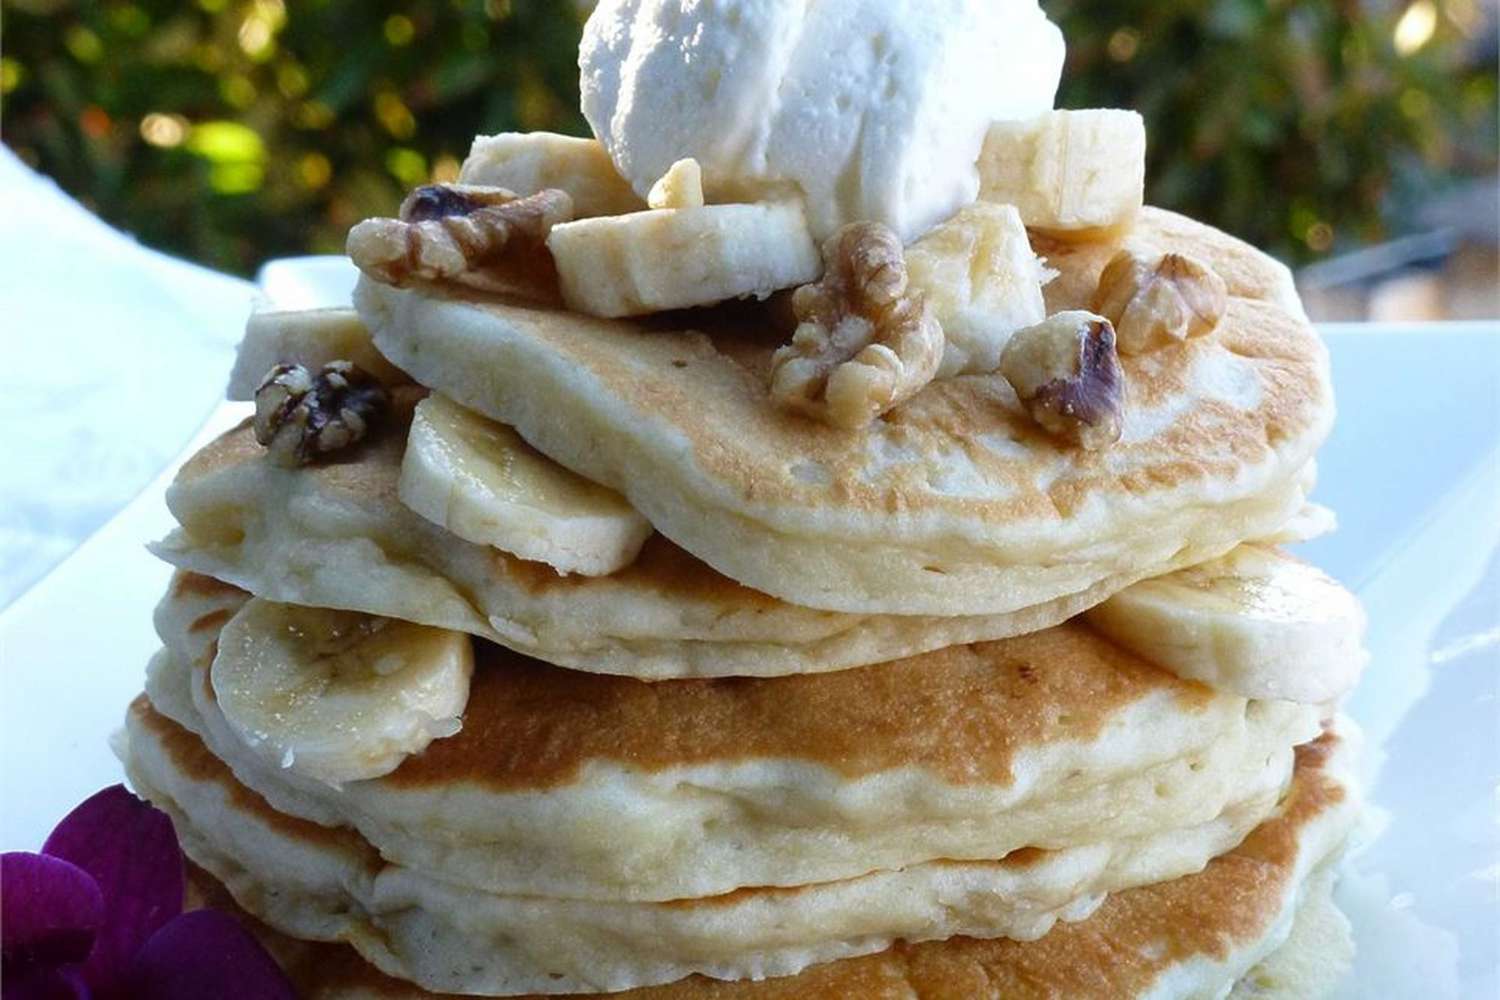 Banana pancakes stacked with whipped cream